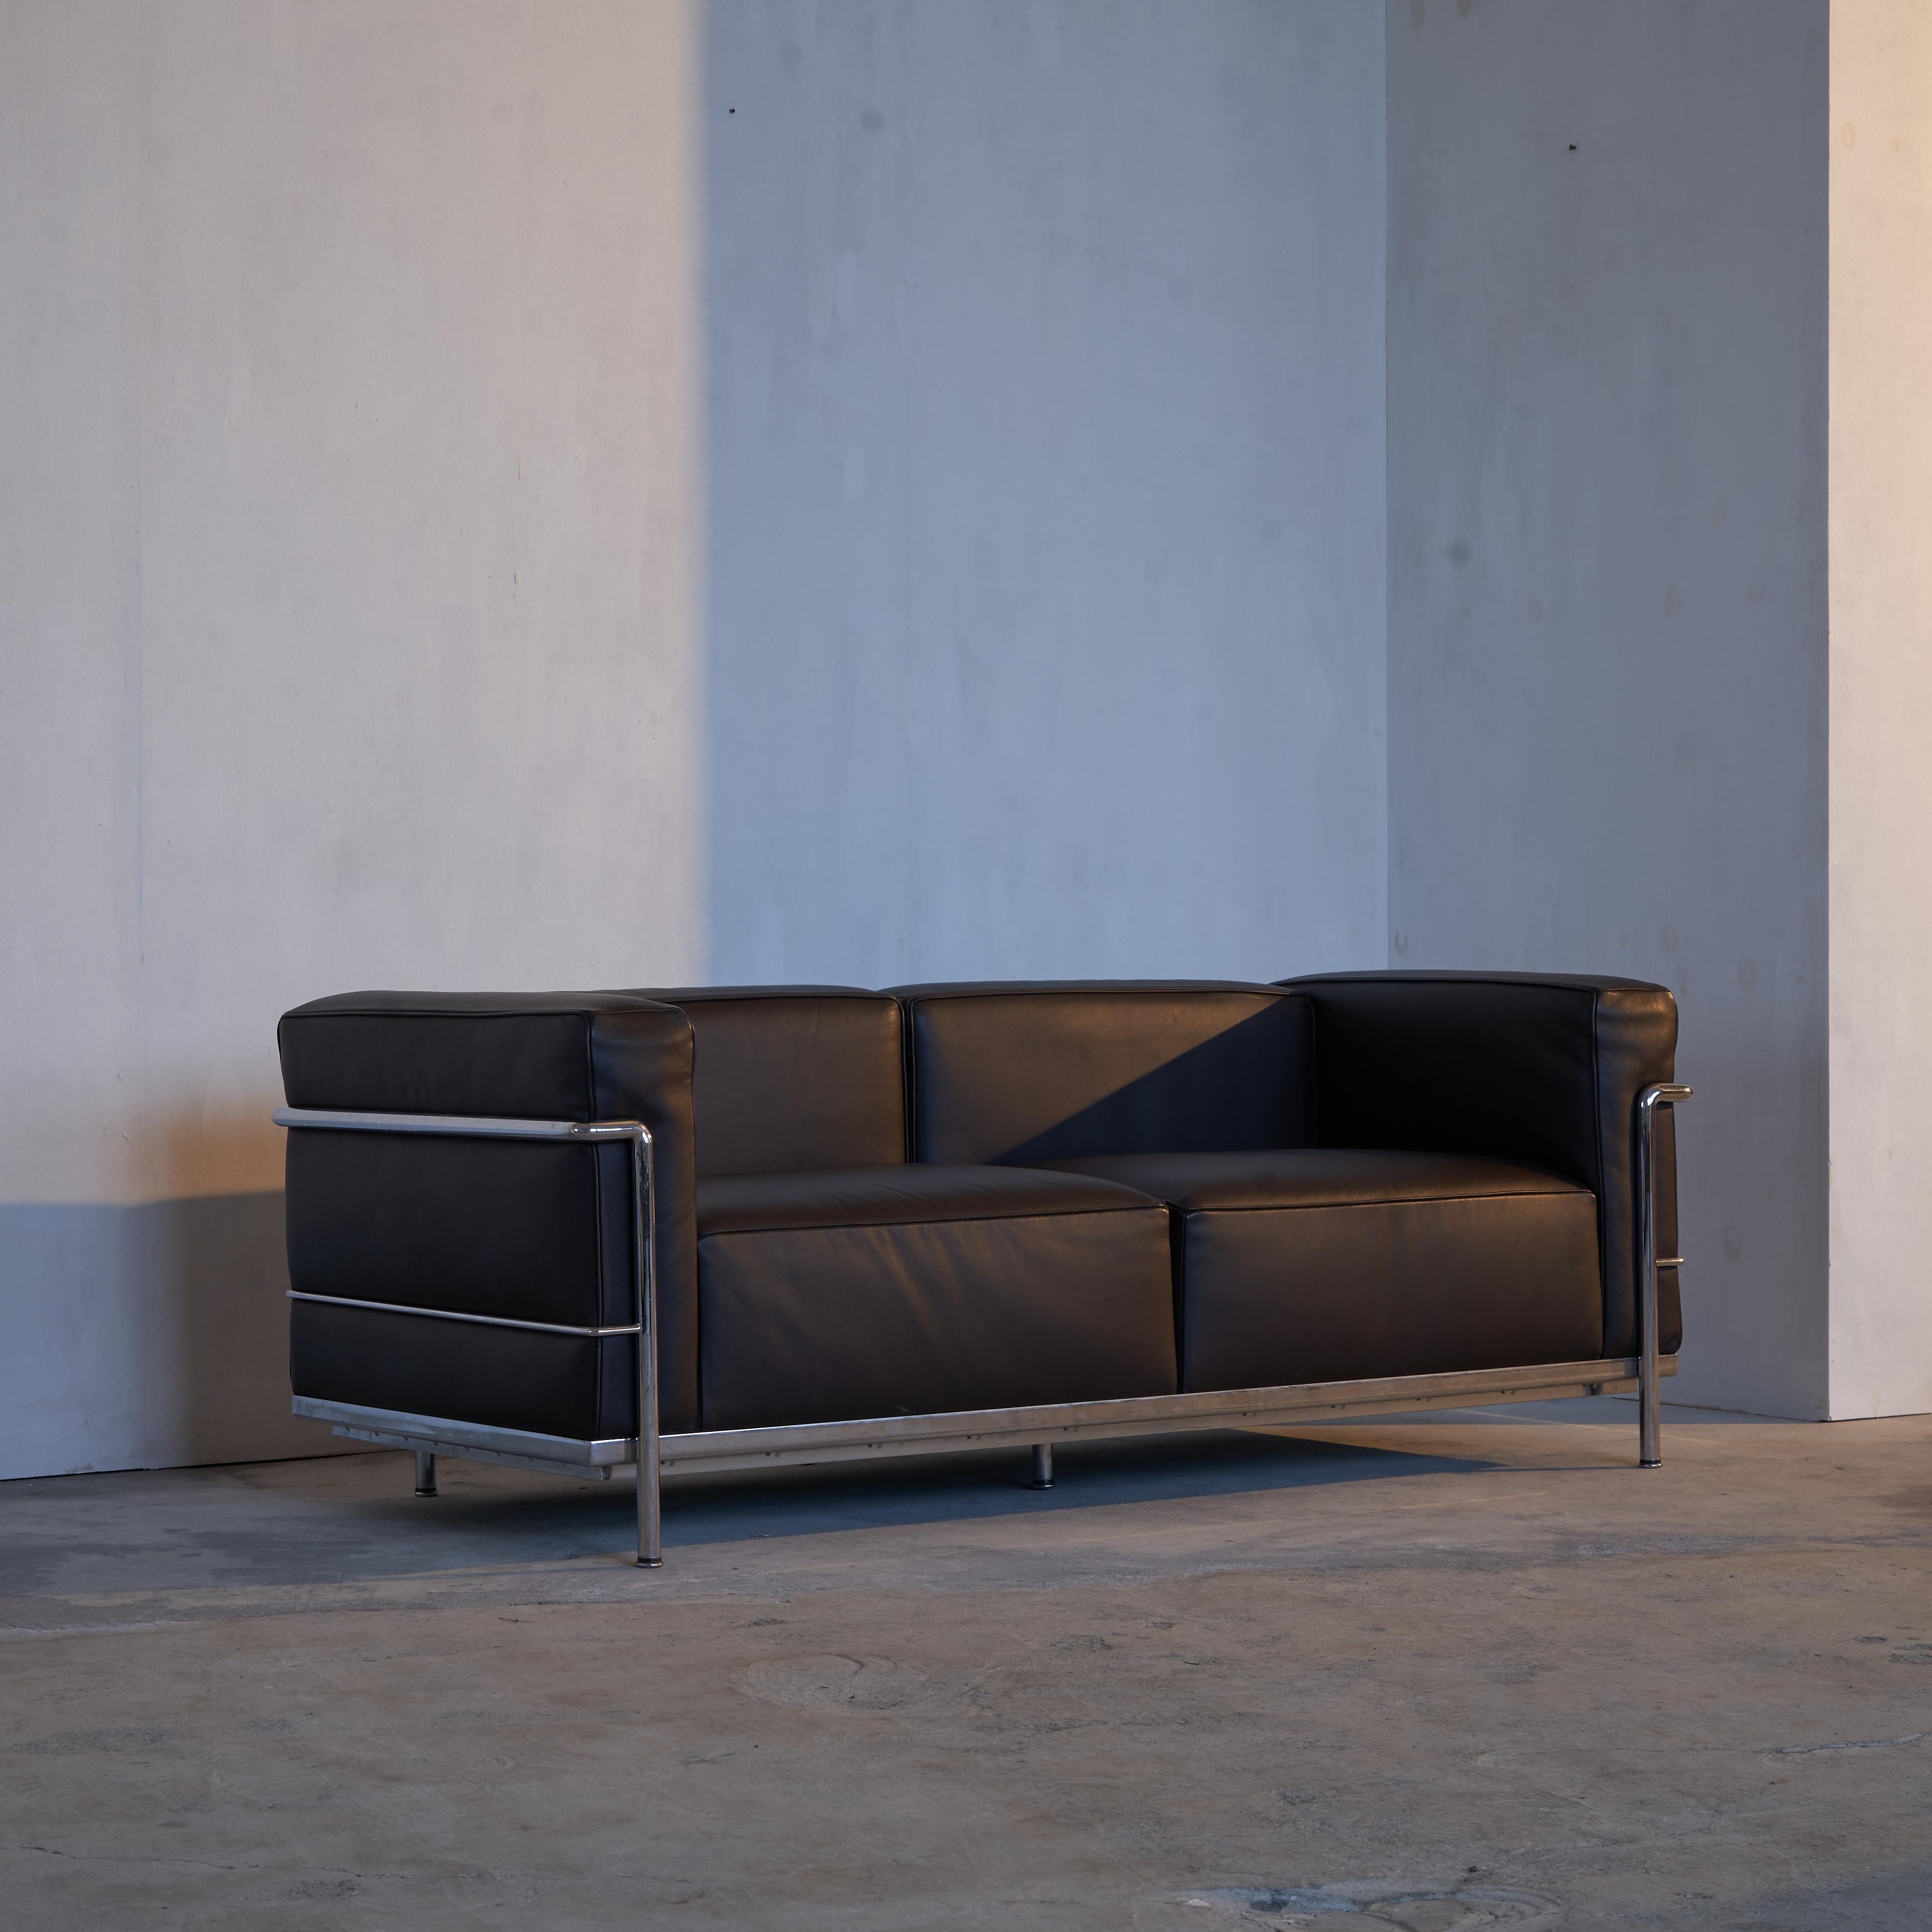 Le Corbusier, Pierre Jeanneret en Charlotte Perriand LC3 Sofa in Brown Leather for Cassina. Italy, 2009.

This stylish and comfortable sofa is a real design classic. Designed in 1928 by Le Corbusier, his cousin Pierre Jeanneret and Charlotte